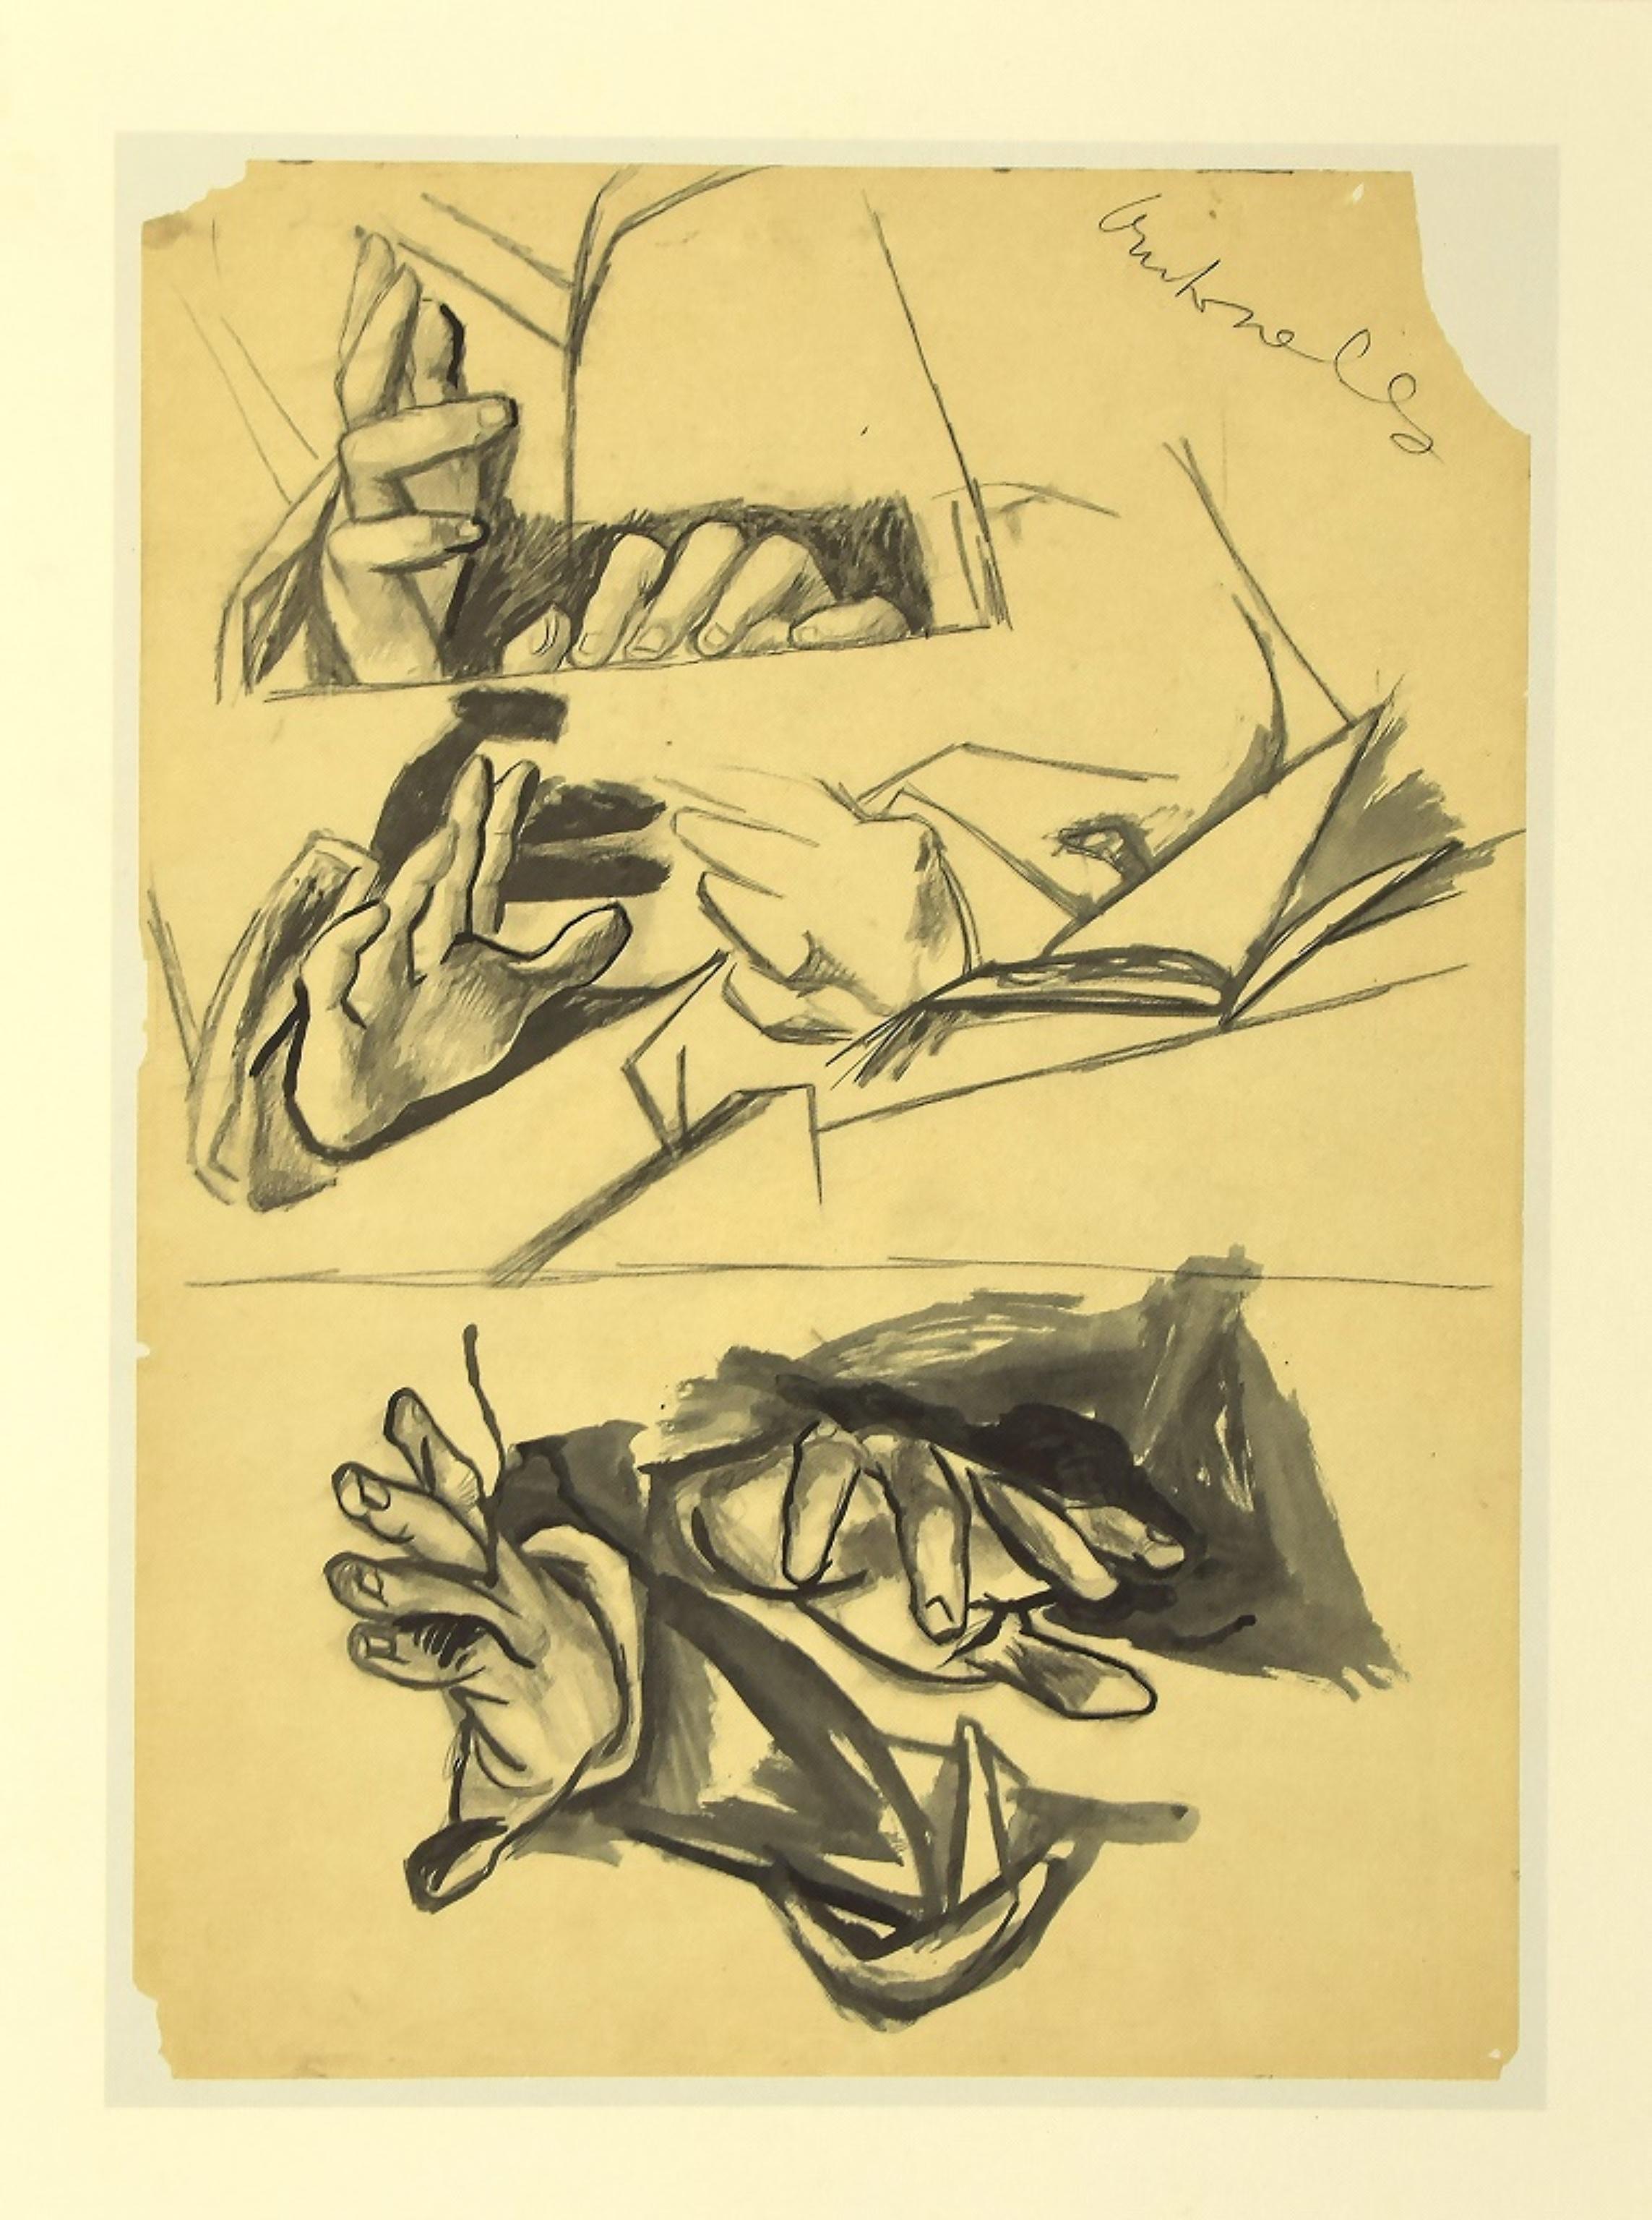 Hands is a vintage offset print realized after a drawing by Renato Guttuso.

The picture is in very good conditions, no signature.  Image Dimensions: 22x30.3 cm.

Renato Guttuso, born Aldo Renato Guttuso (26 December 1911 - 18 January 1987) was an